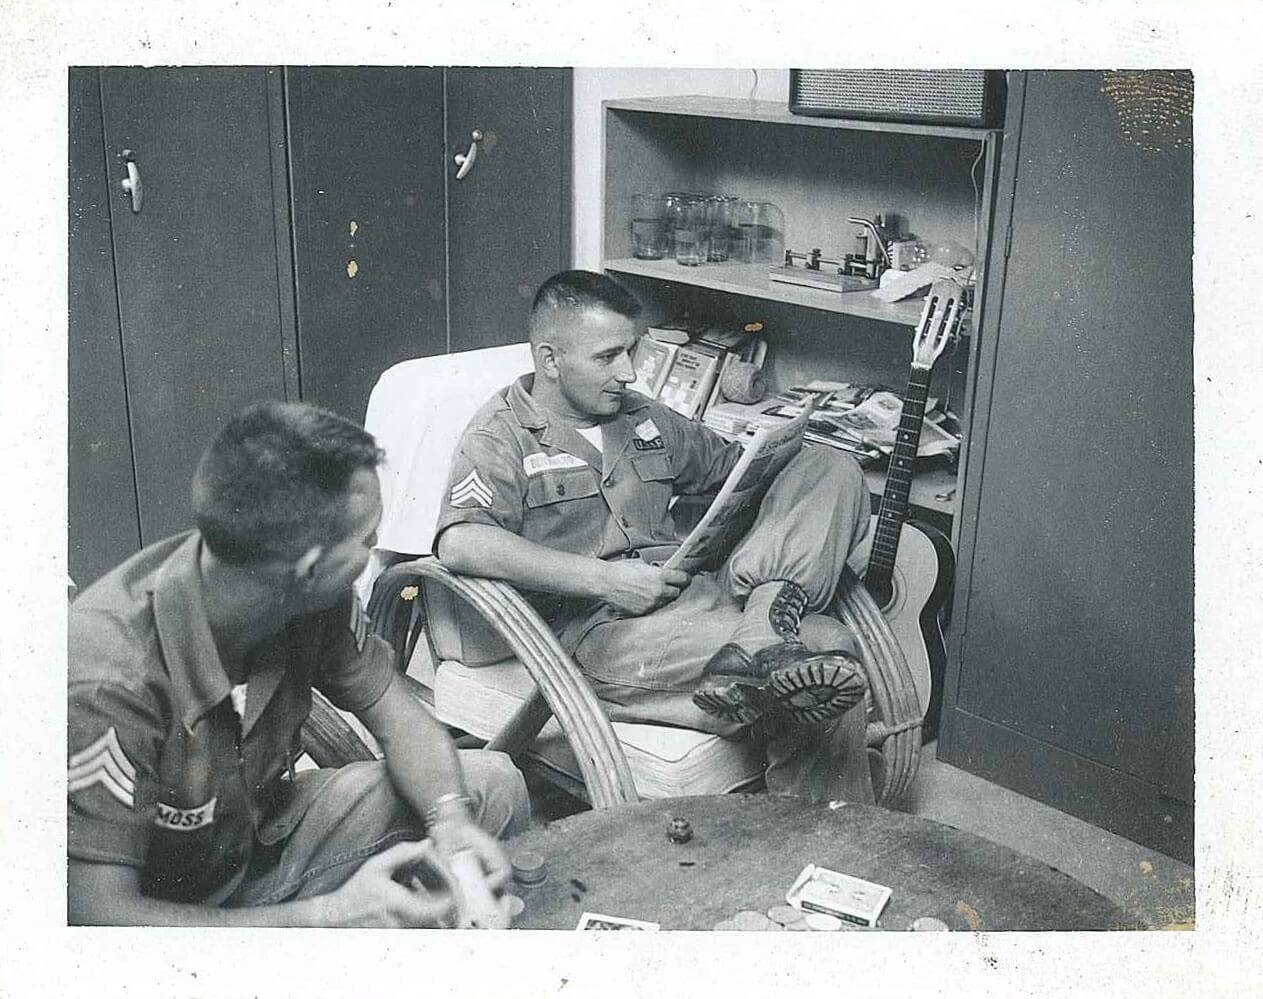 Two U.S. soldiers seated indoors, one reading the paper and the other playing cards.